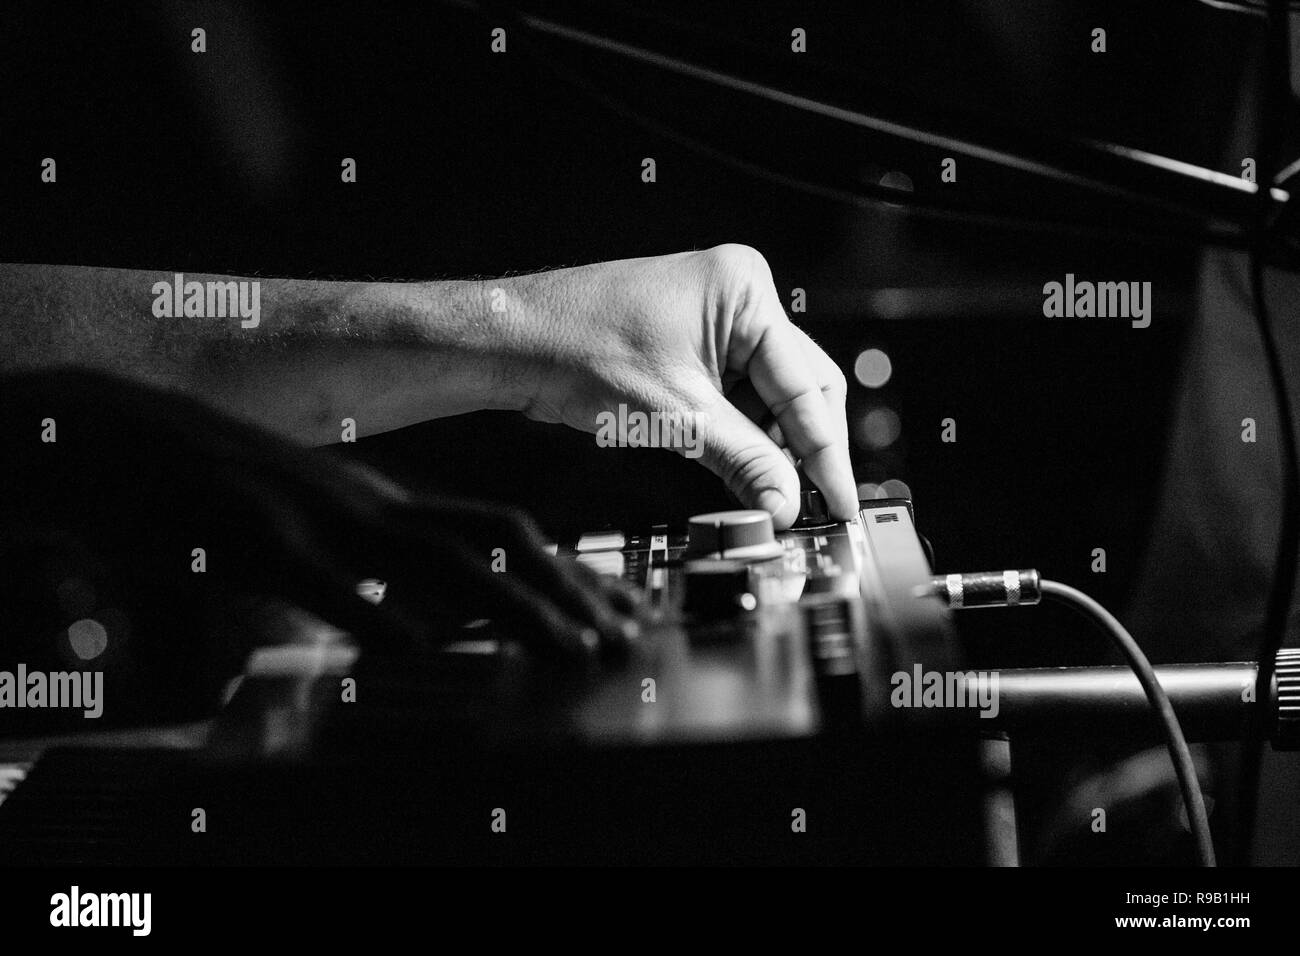 Musician playing keyboards and adjusting settlings knob Stock Photo